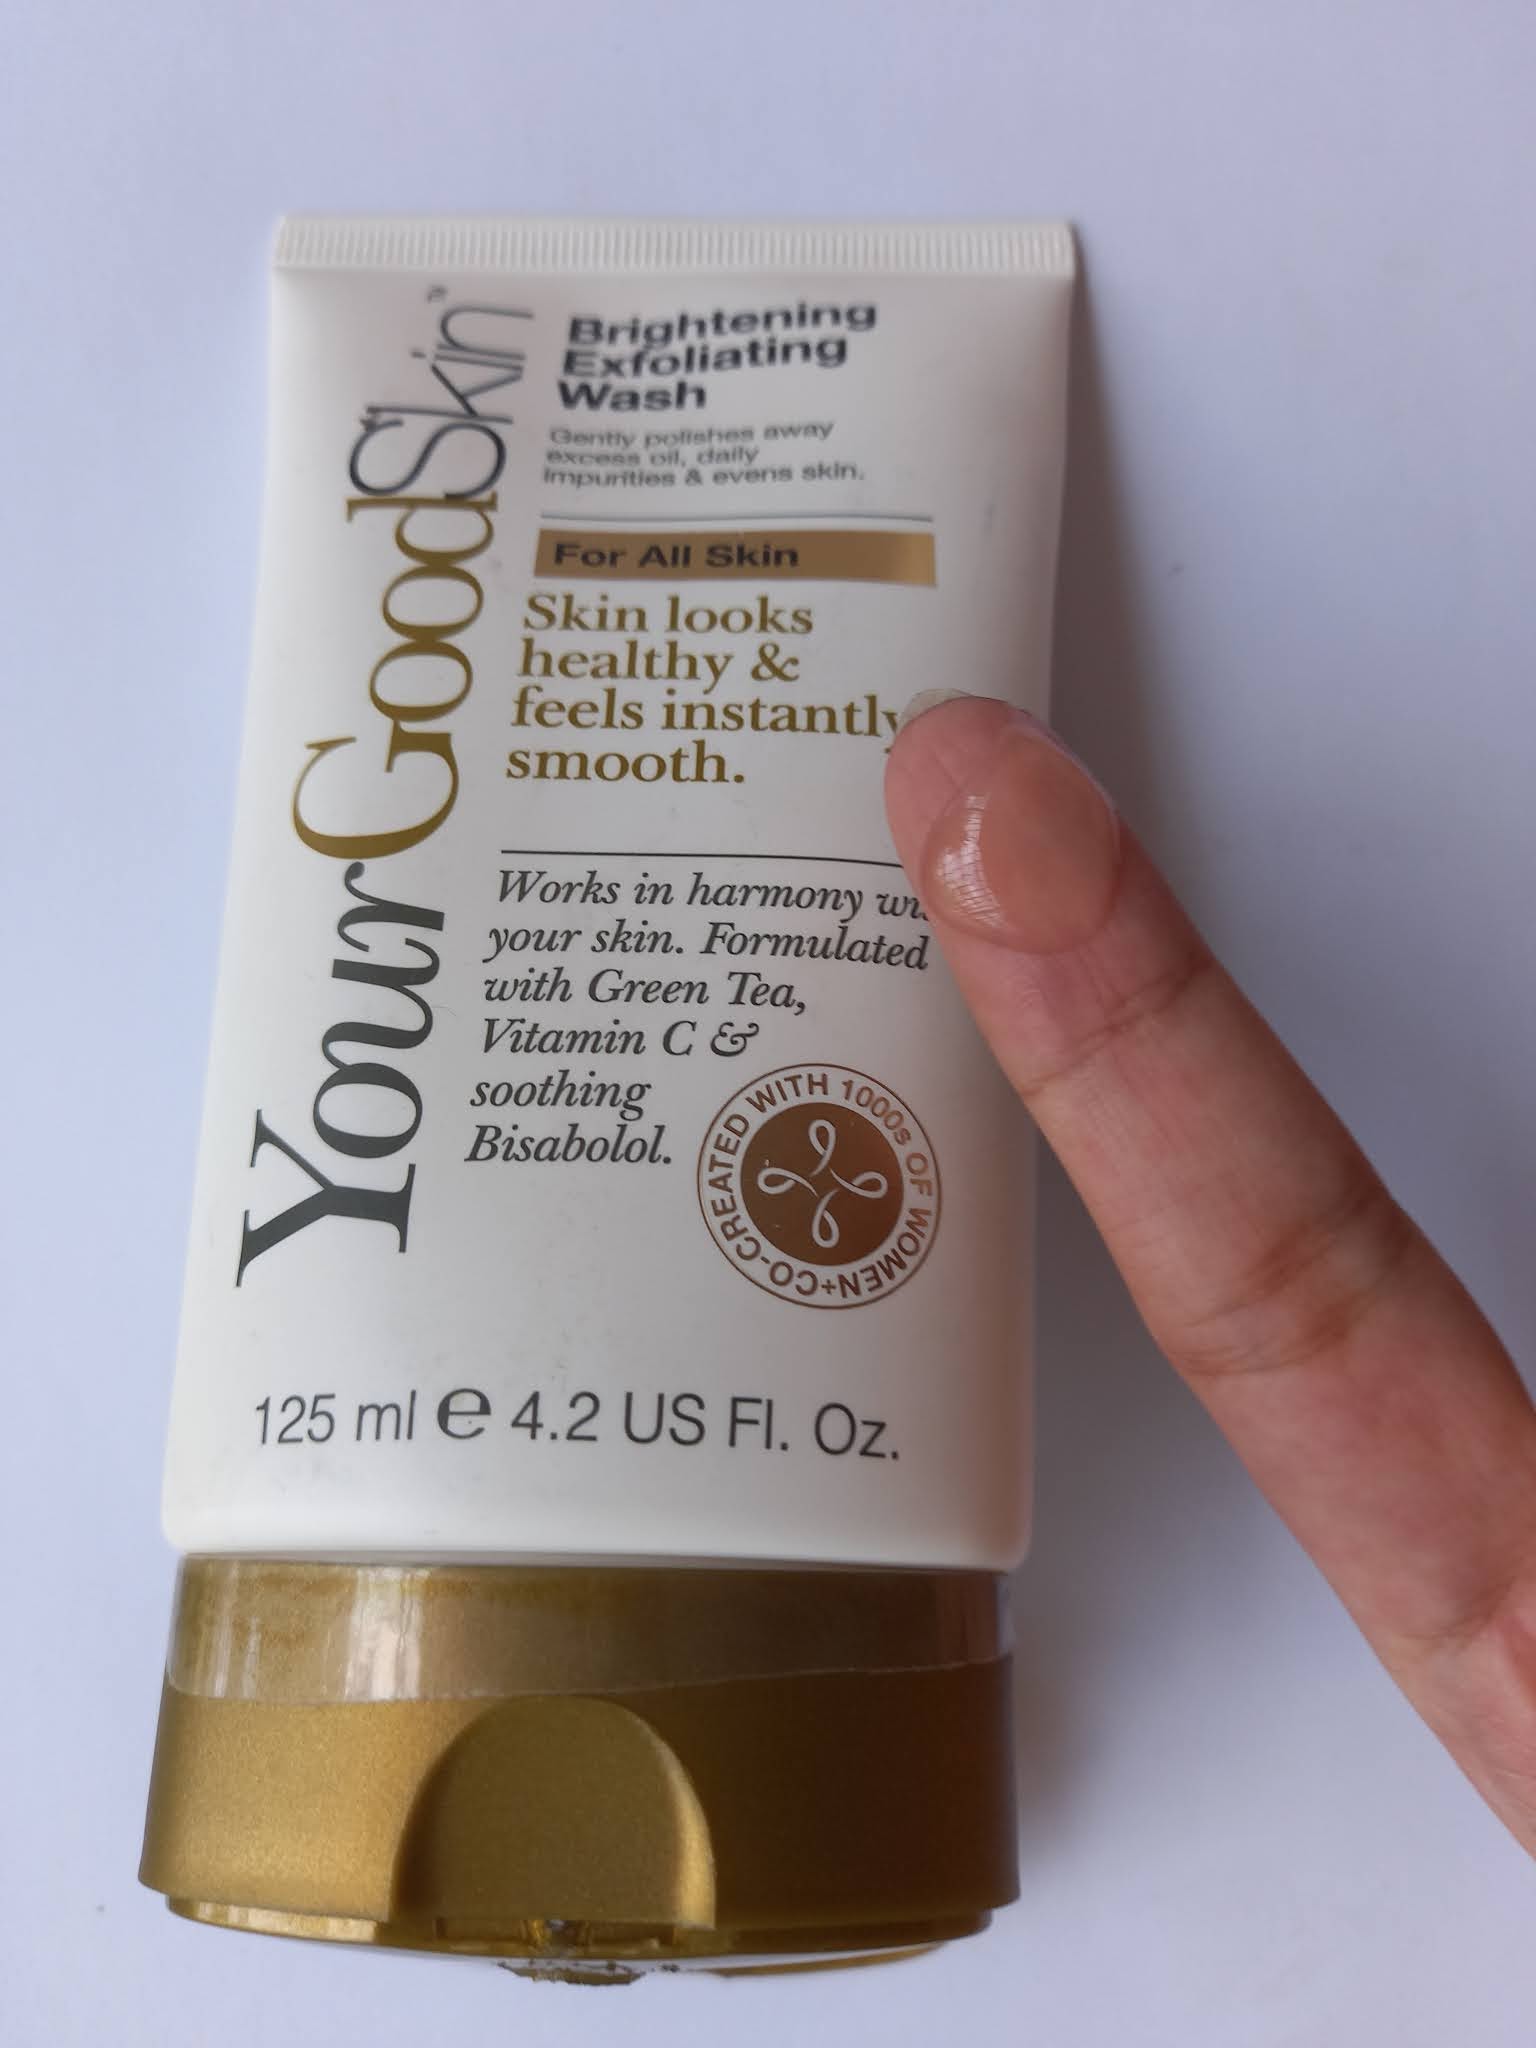 YourGoodSkin Brightening Exfoliating Face Wash - perfect skin care gift for people with oily and acne prone skin! #skincare #facewash #beautytips